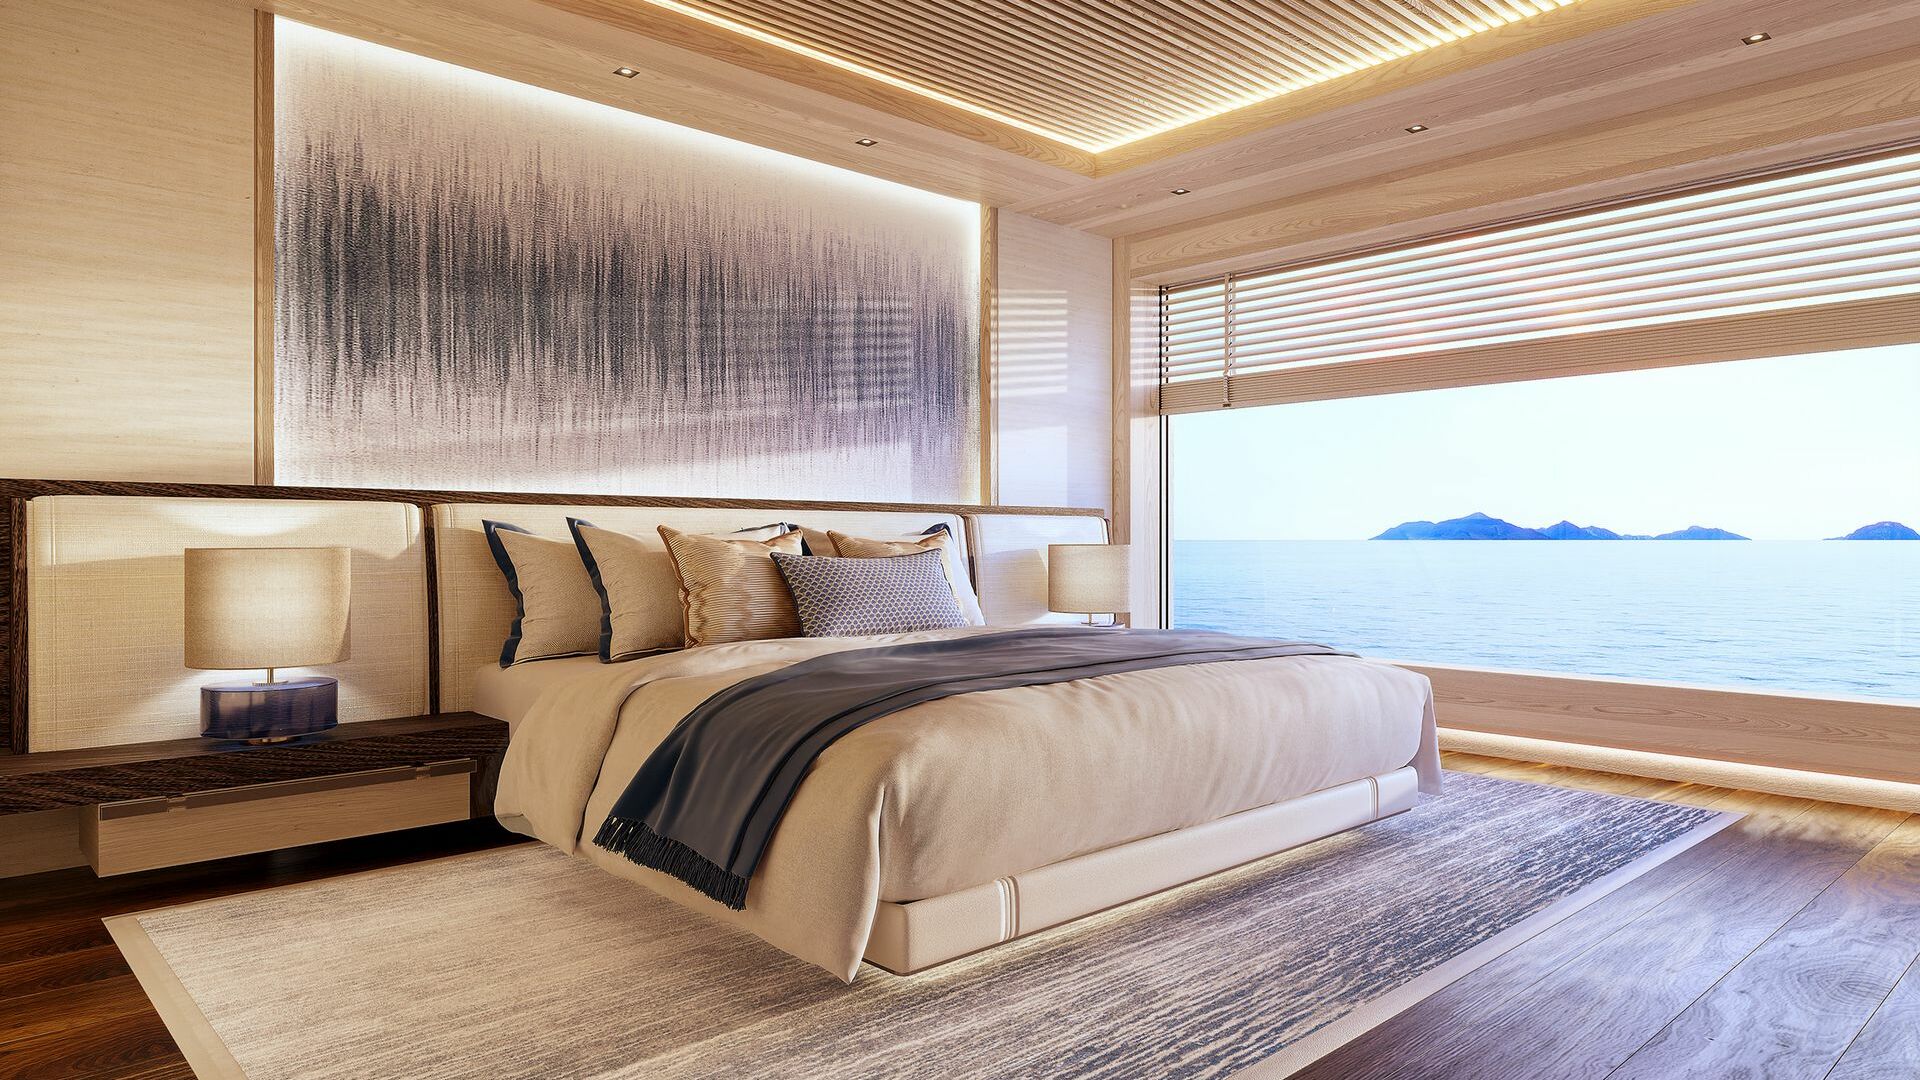 Sinot Yacht Architecture AWARE 80m Motor Yacht Guest Stateroom